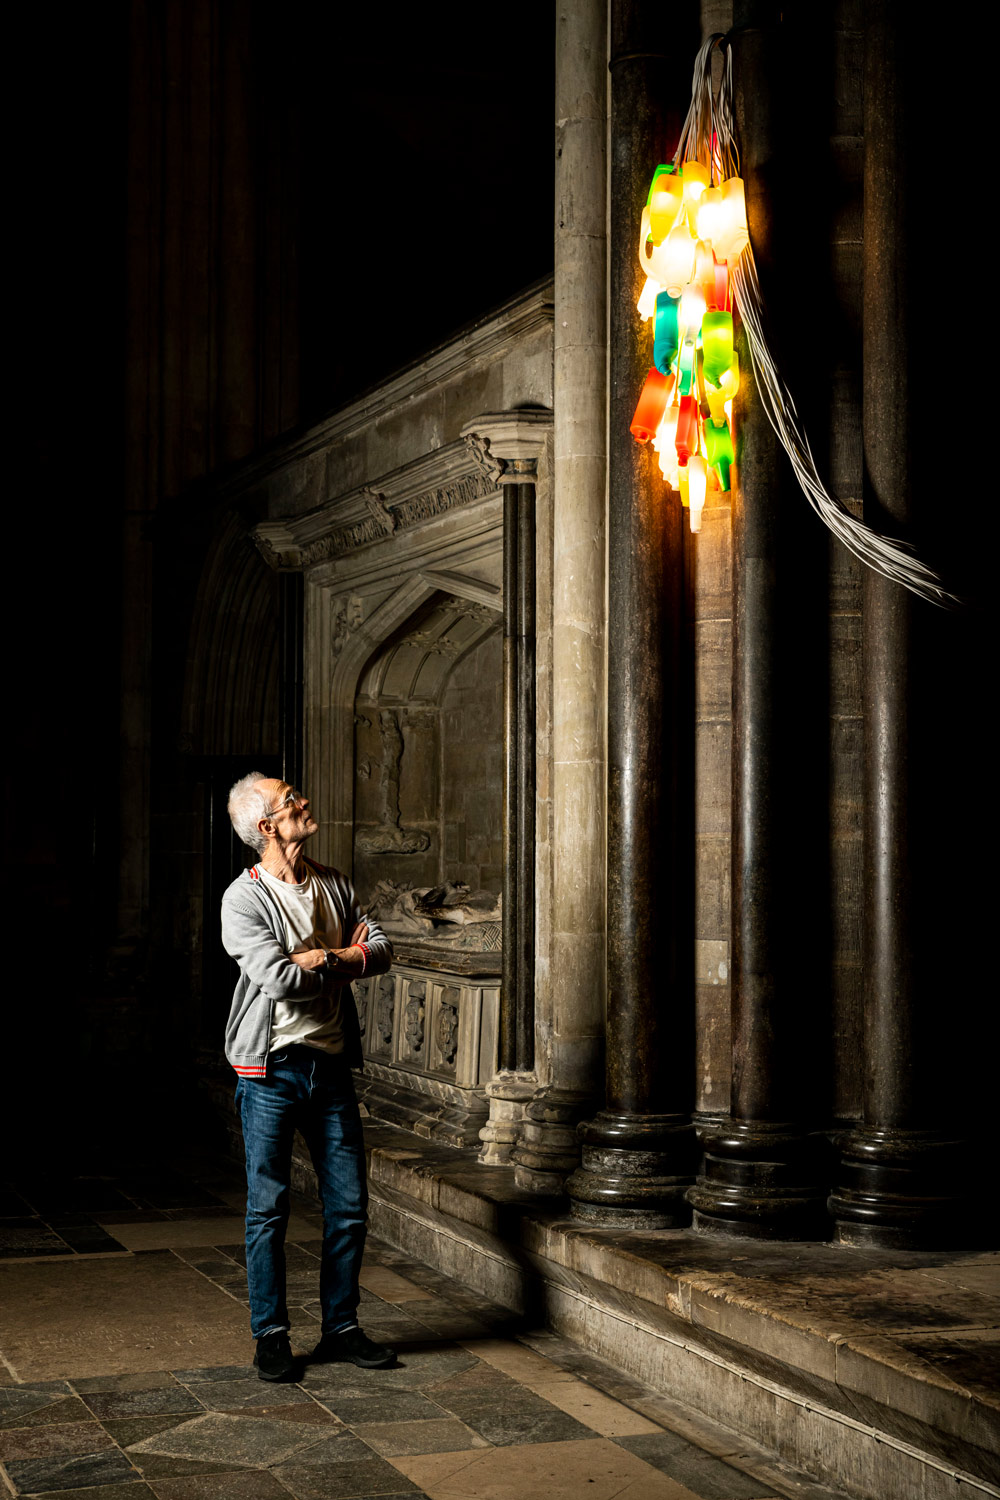 Artist David Batchelor looking up to one of his CandelasCredit: Max Willcock